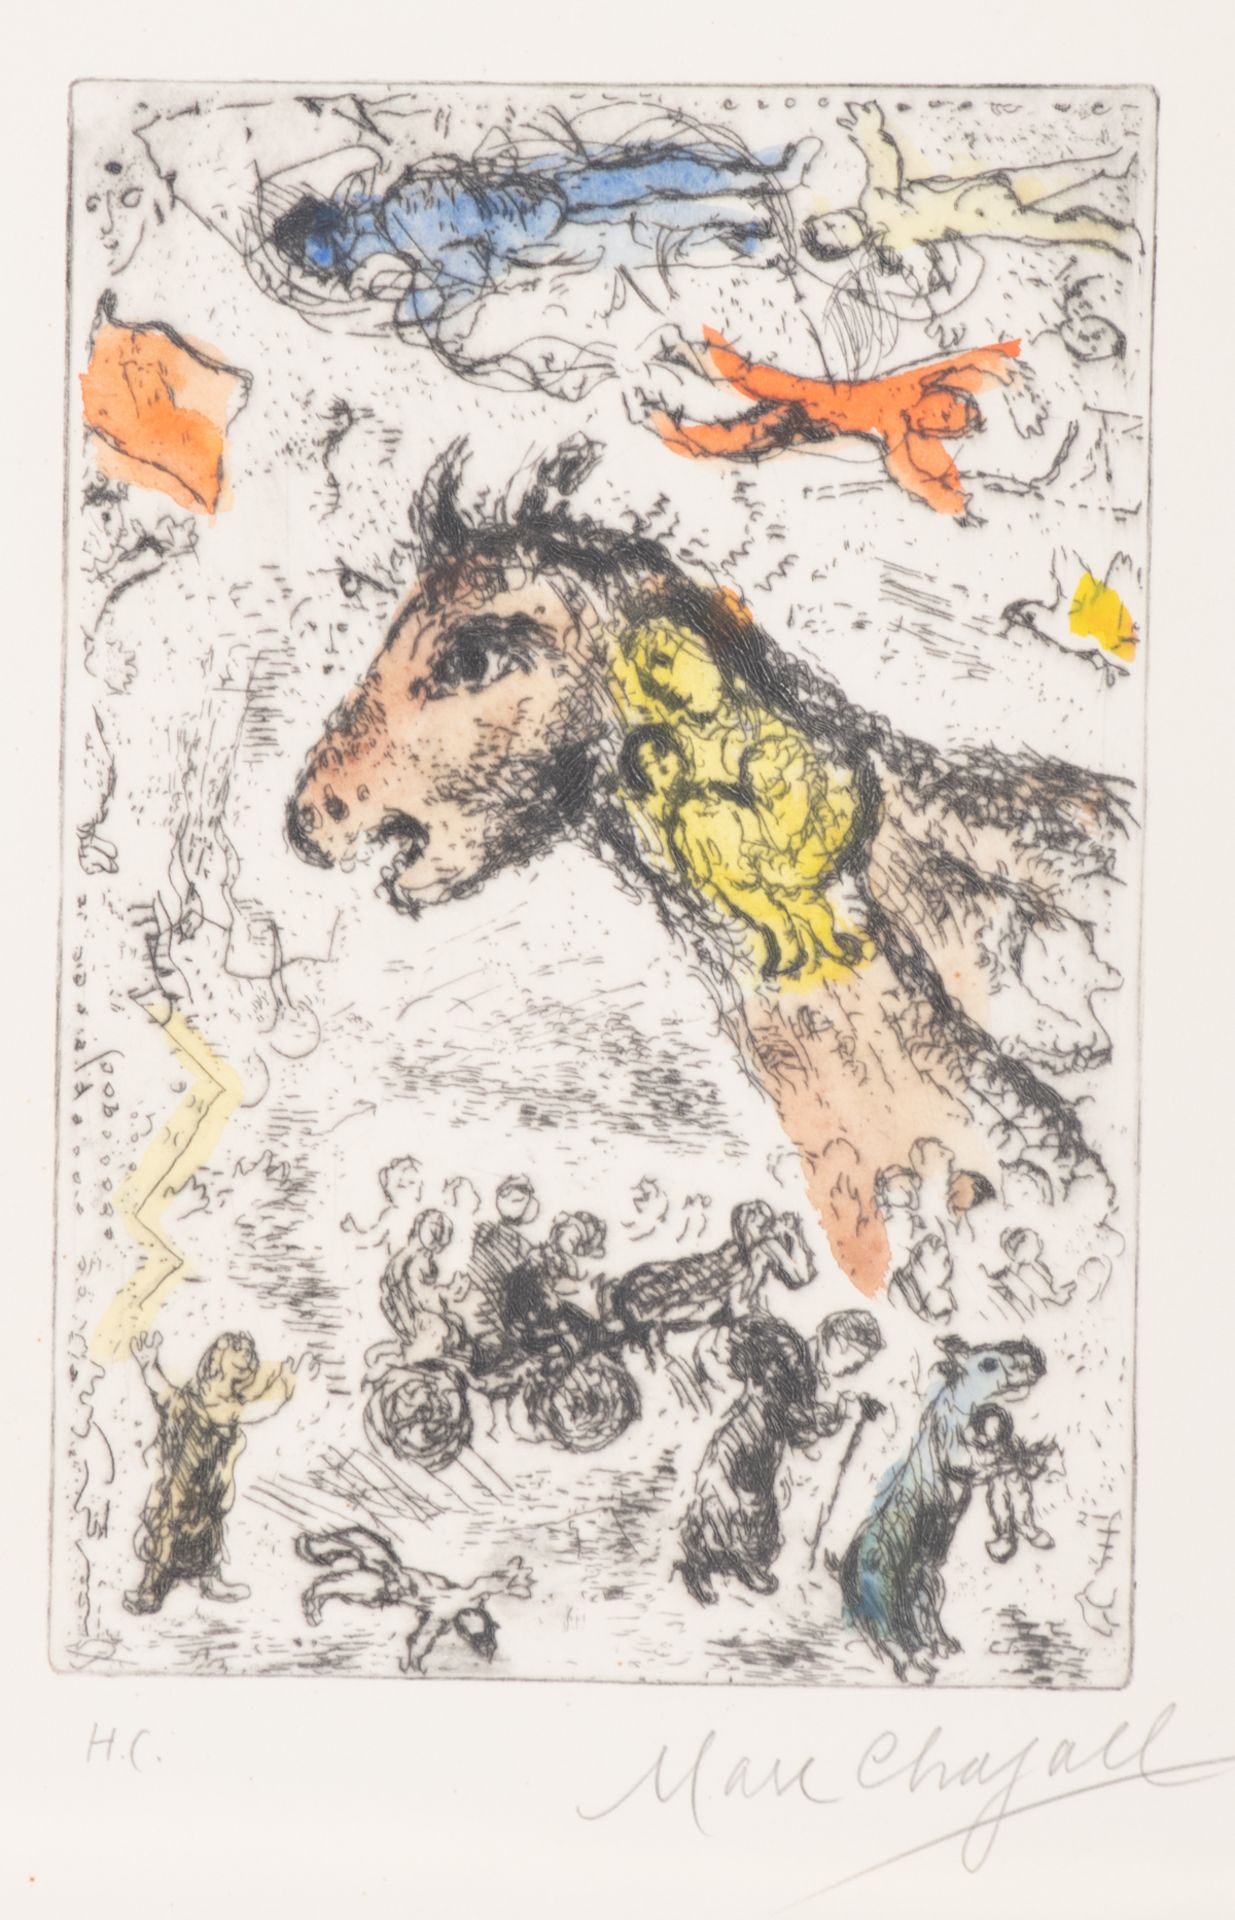 Chagall M., the dream, a hand-coloured etching, 'Hors Commerce', 16,4 x 24 cm Is possibly subject of